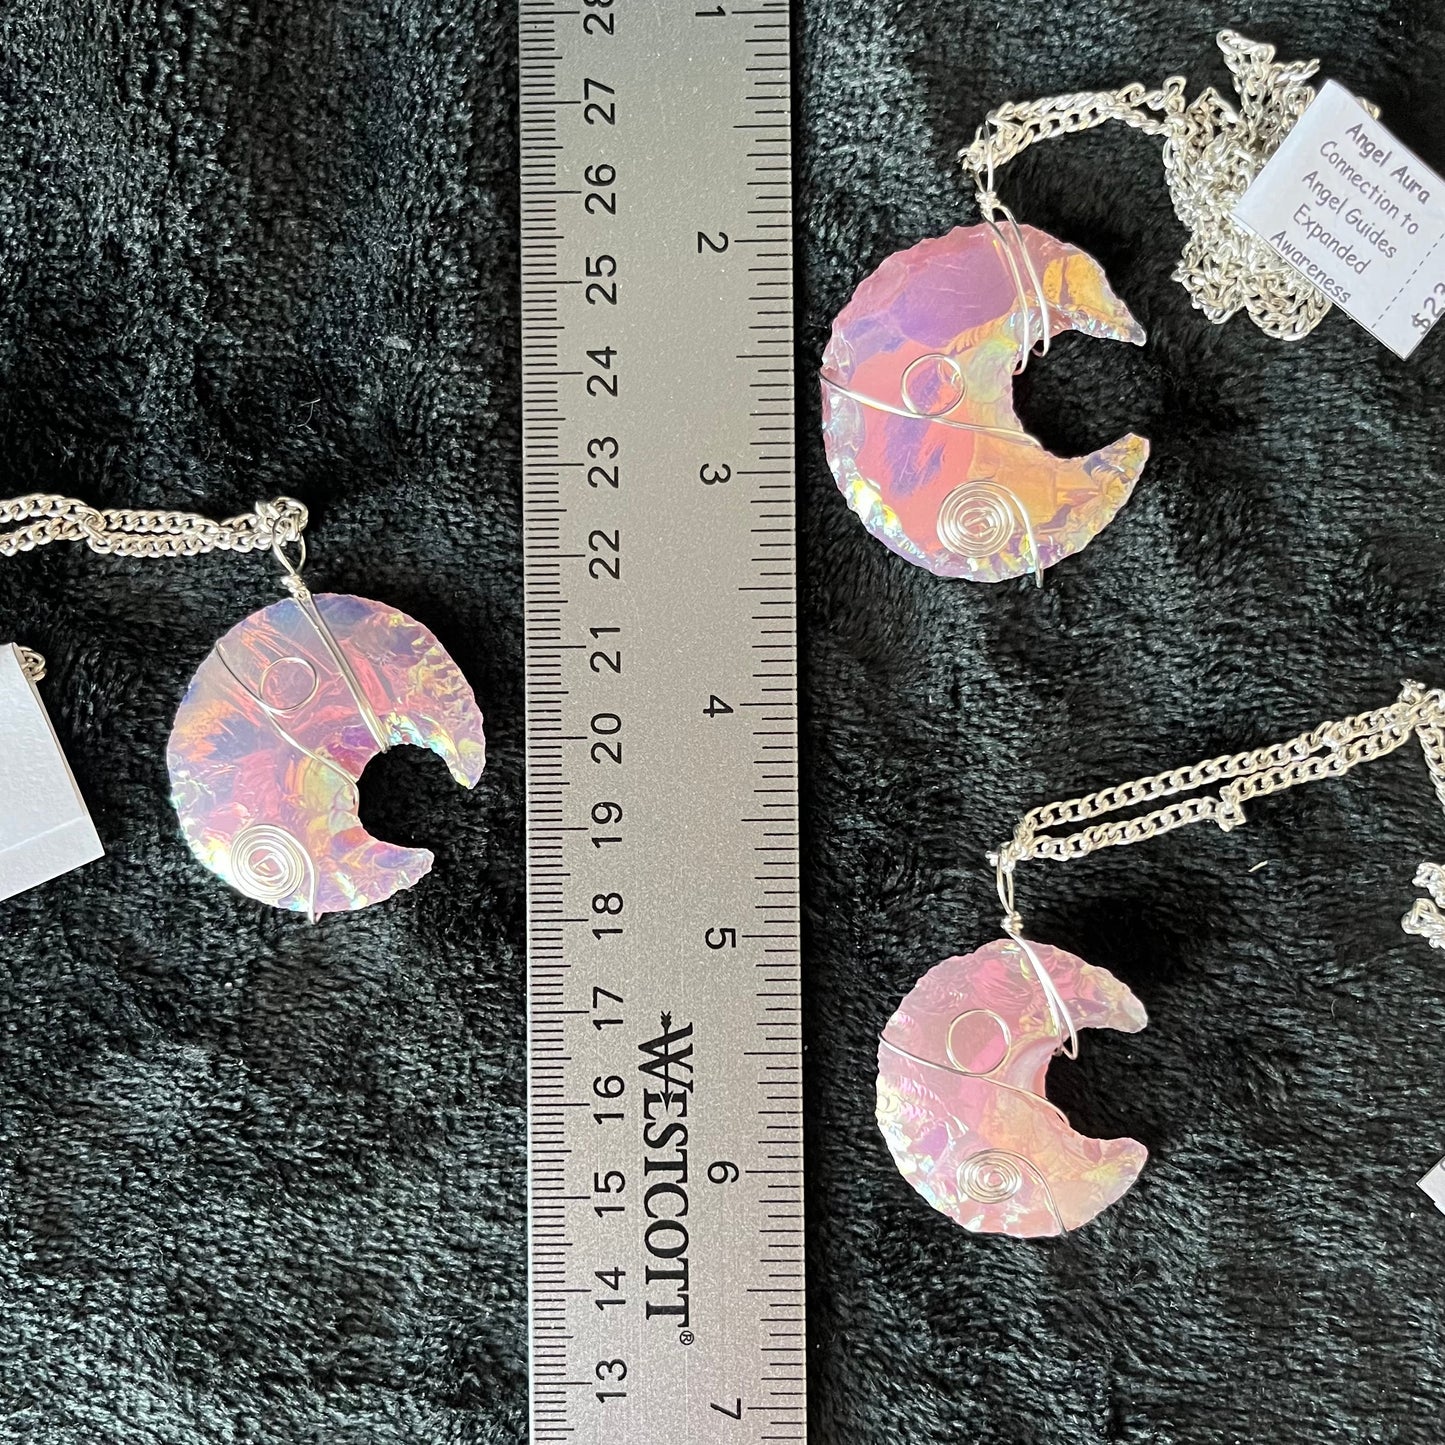 shimmery mettallic lookong ponk angel aura pink opalite, knappes creacent moon ornately silver wire wrapped pendant attatched to a silver chain, next to a ruler